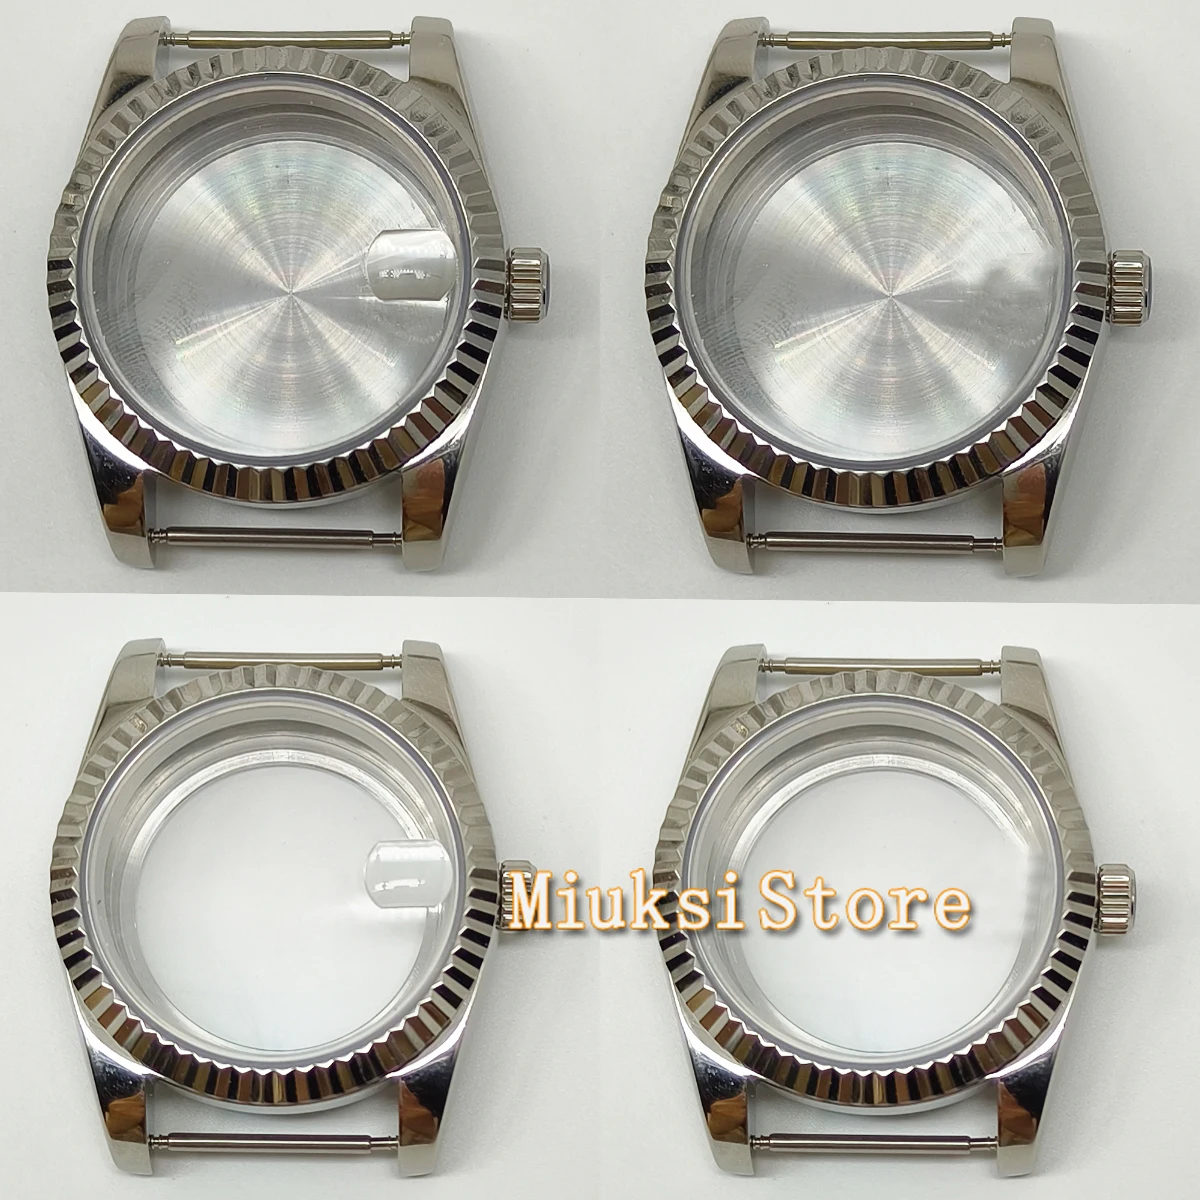 

36mm 39mm Watch Case Stainless Steel Polished Sapphire Glass fit NH35 NH36 Miyota8215 821A ETA 2836 2824 ST2130 PT5000 Movement